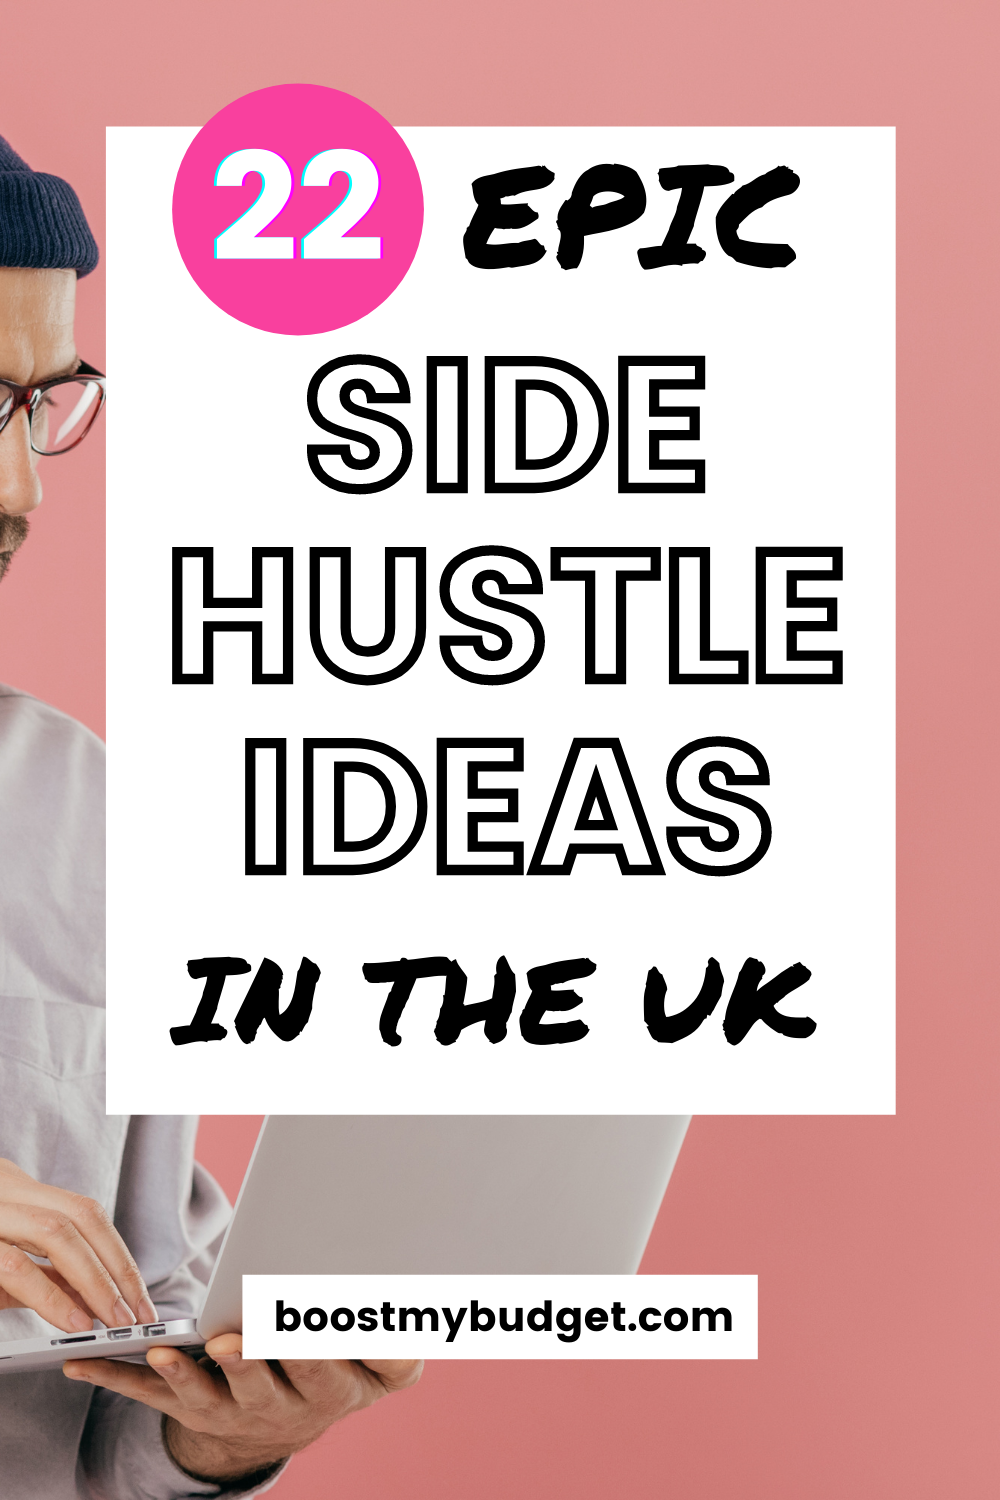 Social media image with the text "22 epic side hustle ideas in the UK" in a white box over a pink background. We can also partially see an image of a young man wearing glasses and a beanie using his laptop to make money online.